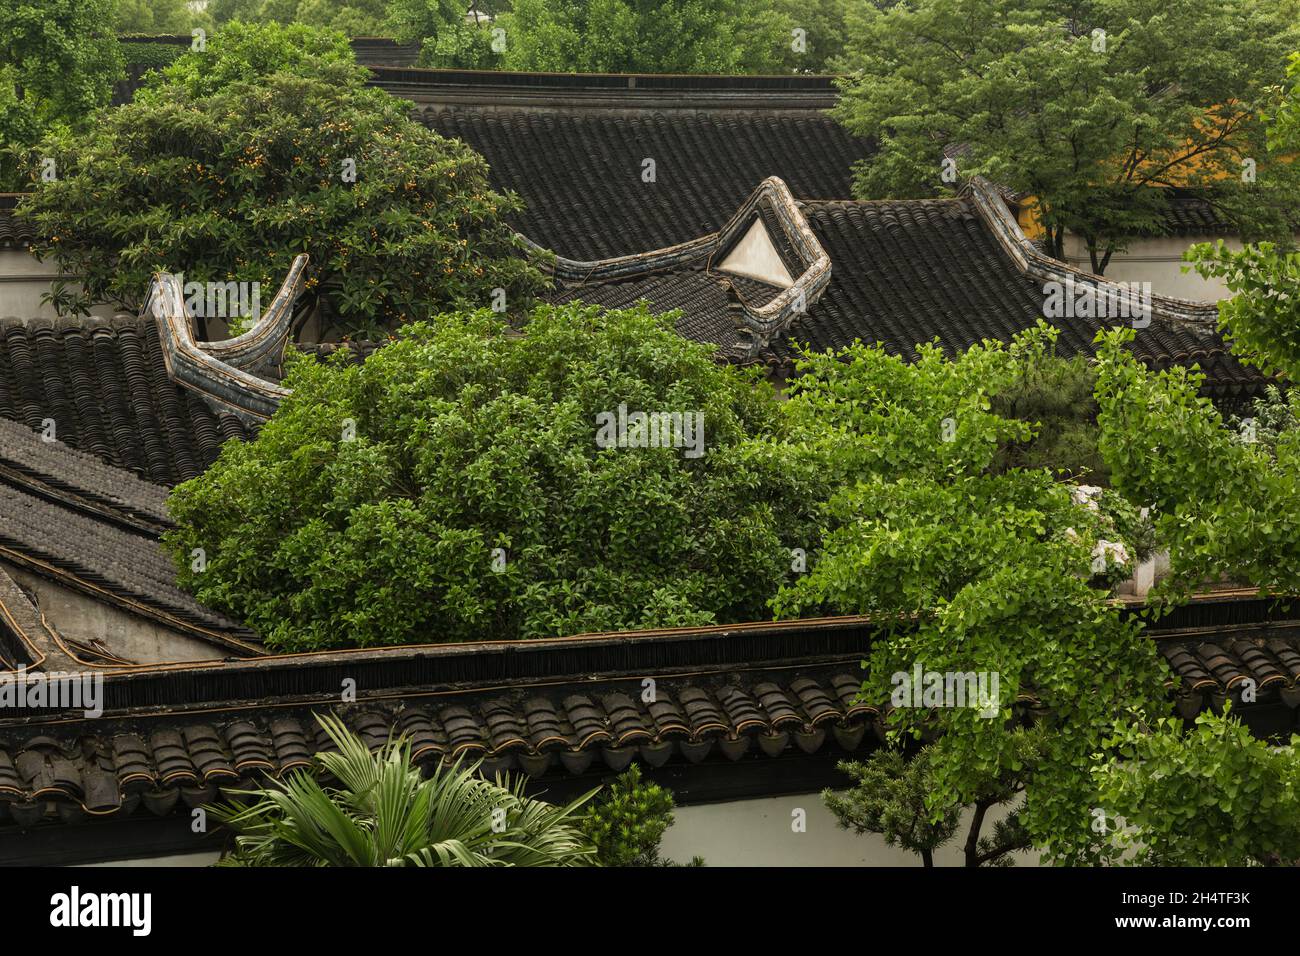 Architectural detail of the traditional clay tile roofs in the Pan Gate Scenic Area in Suzhou, China. Stock Photo